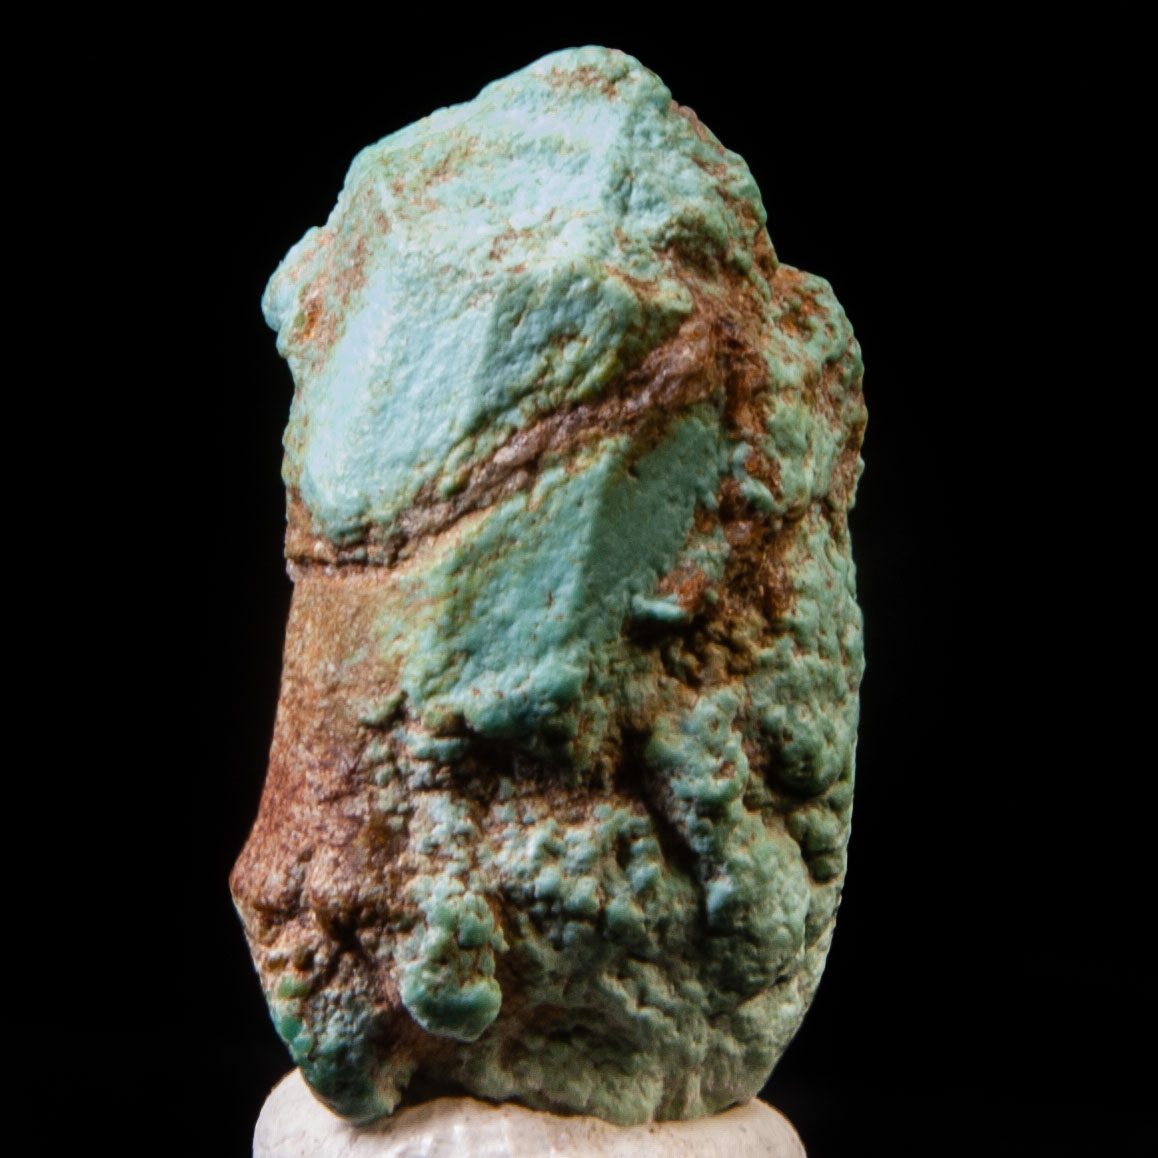 Turquoise pseudomorph after Fluorapatite